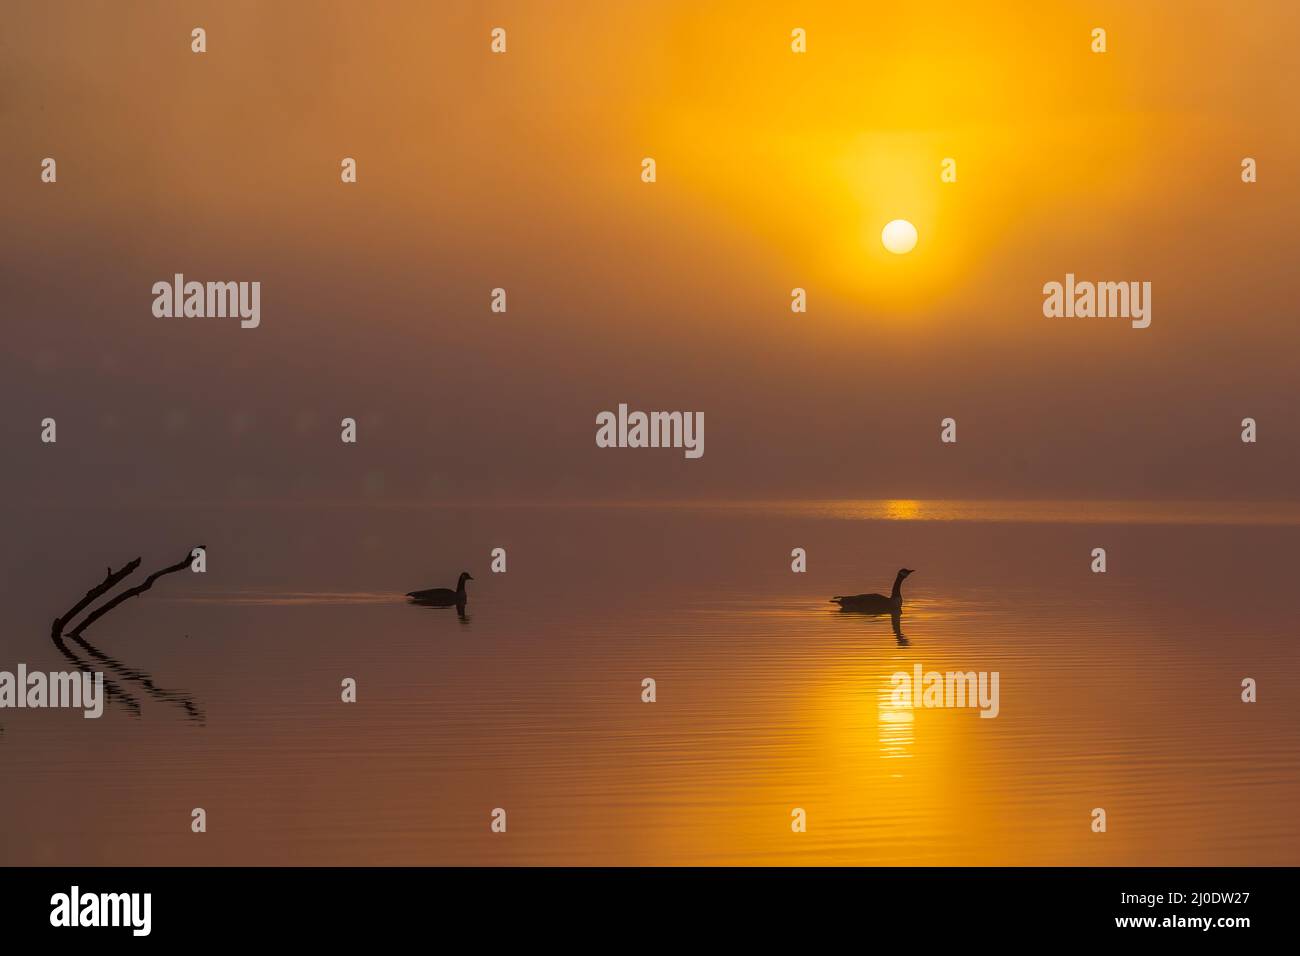 A pair of Canada Geese paddle silently across the calm surface of a lake as the sun rises on a foggy morning. Stock Photo